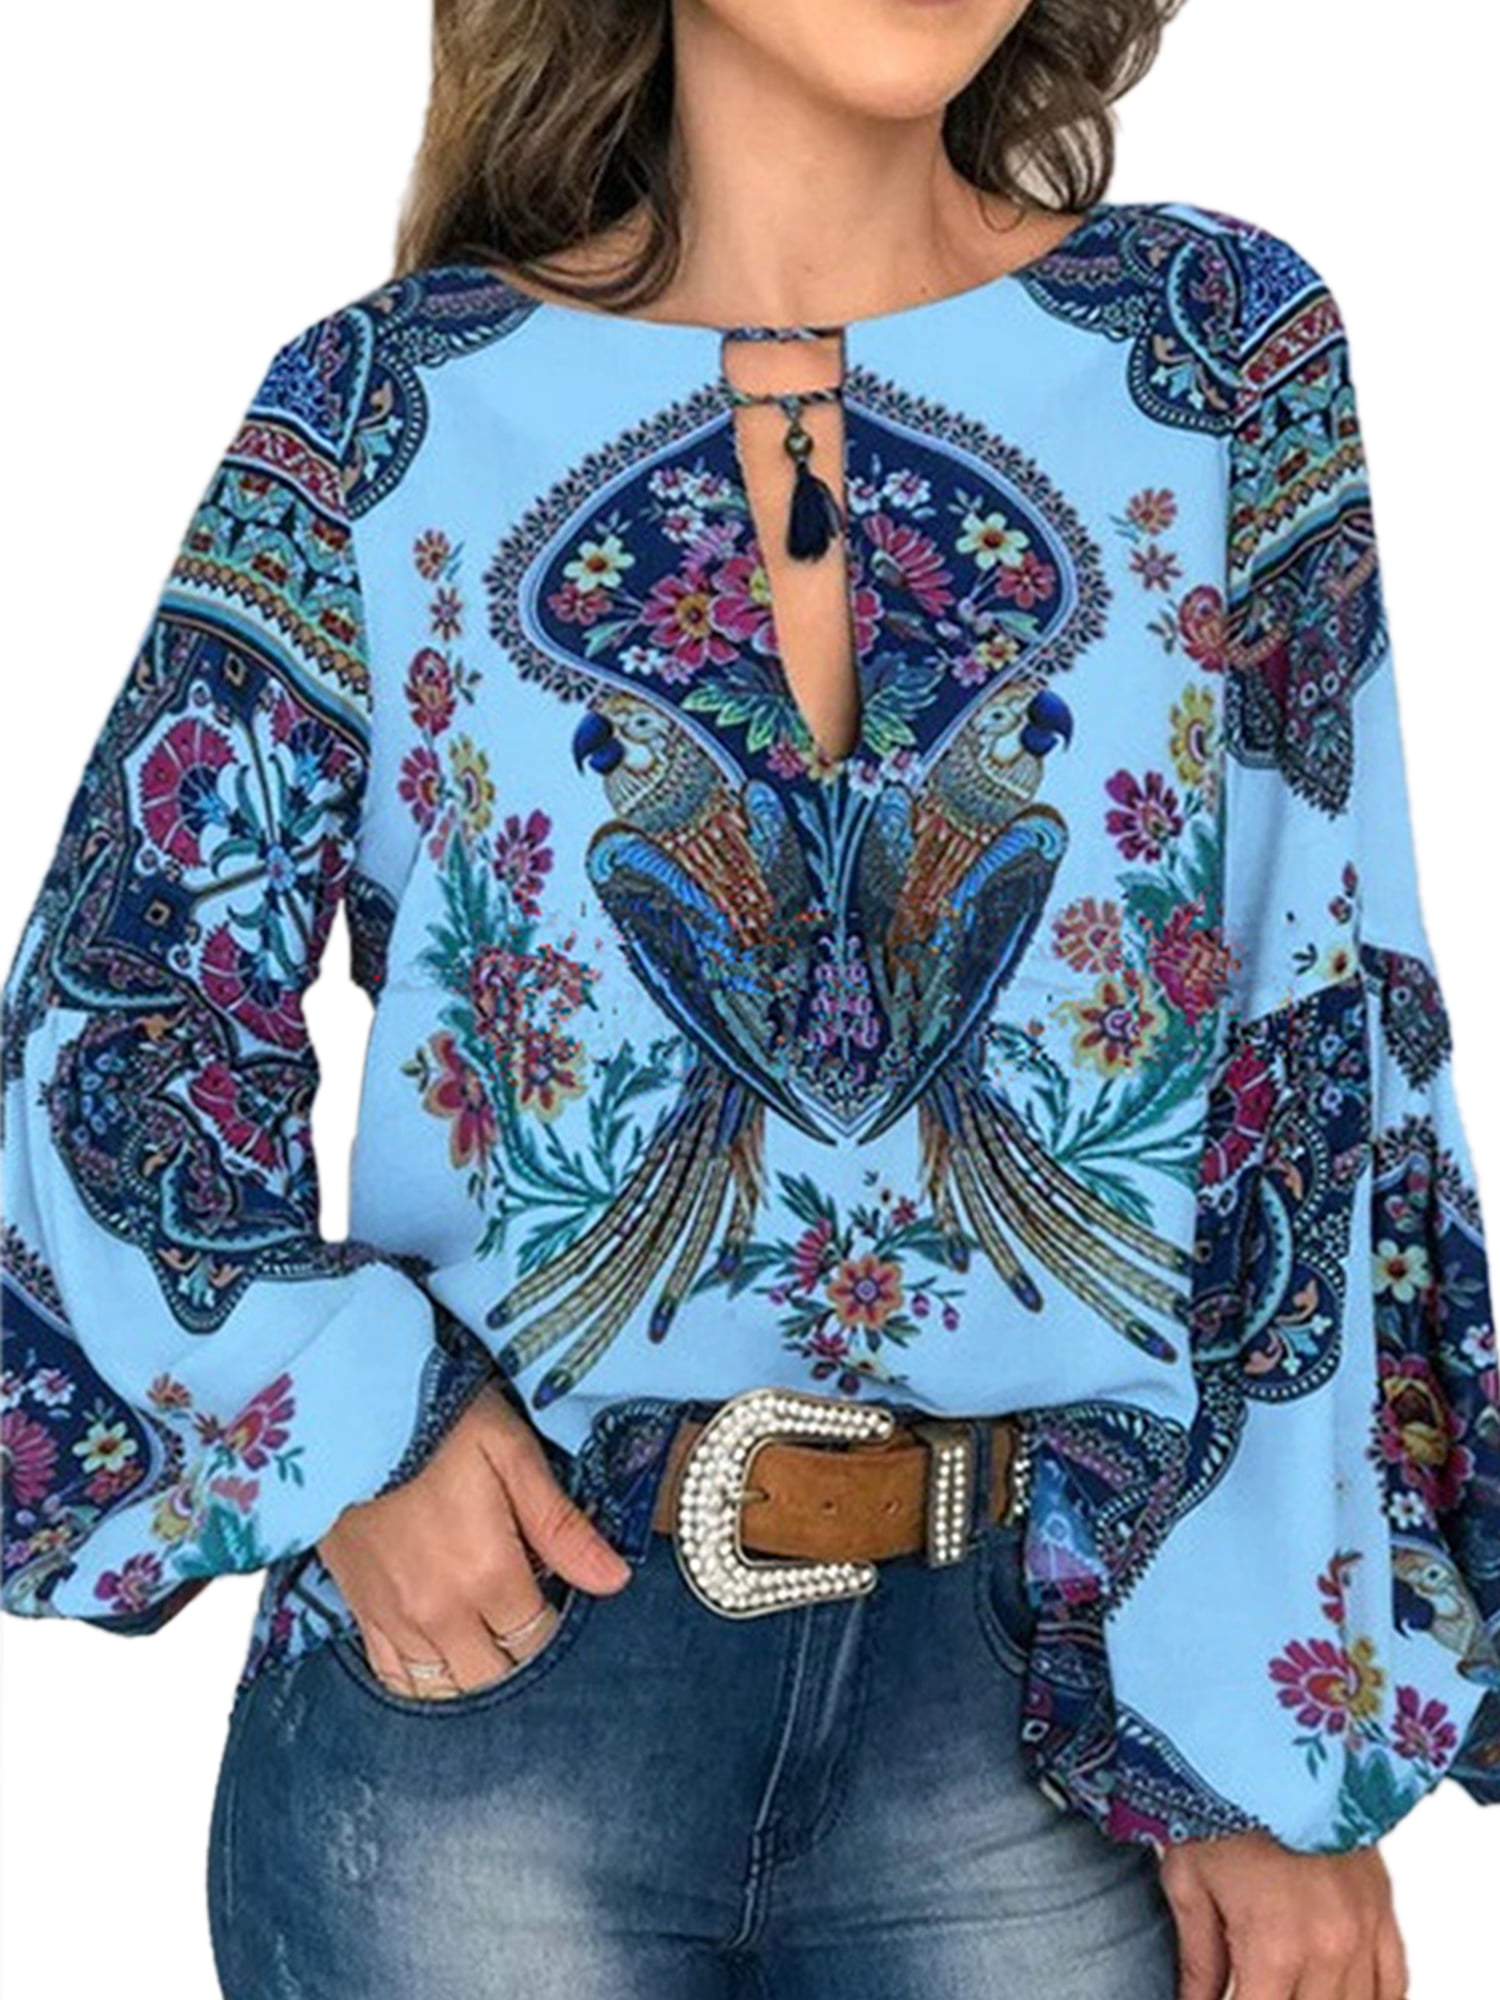 Women's V Neck Long Sleeve Blouses Bohemian Floral Print Casual Loose Vintage Tunic Tops T Shirts Pullover 